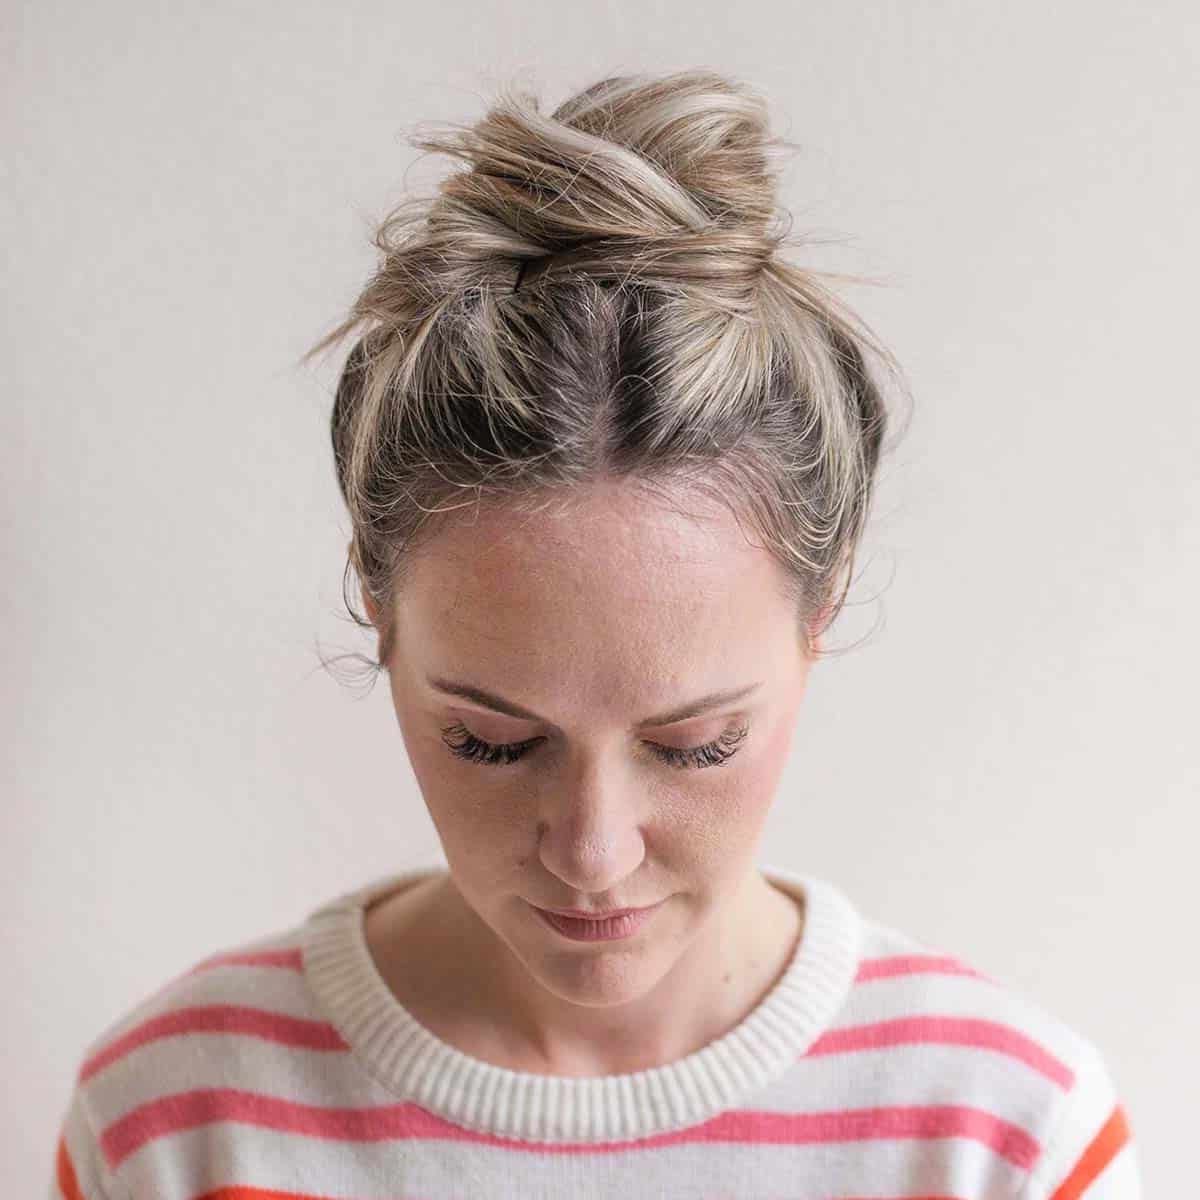 How To Style A Top Knot – A Beautiful Mess Inside Popular Medium Length Hairstyles With Top Knot (View 7 of 20)